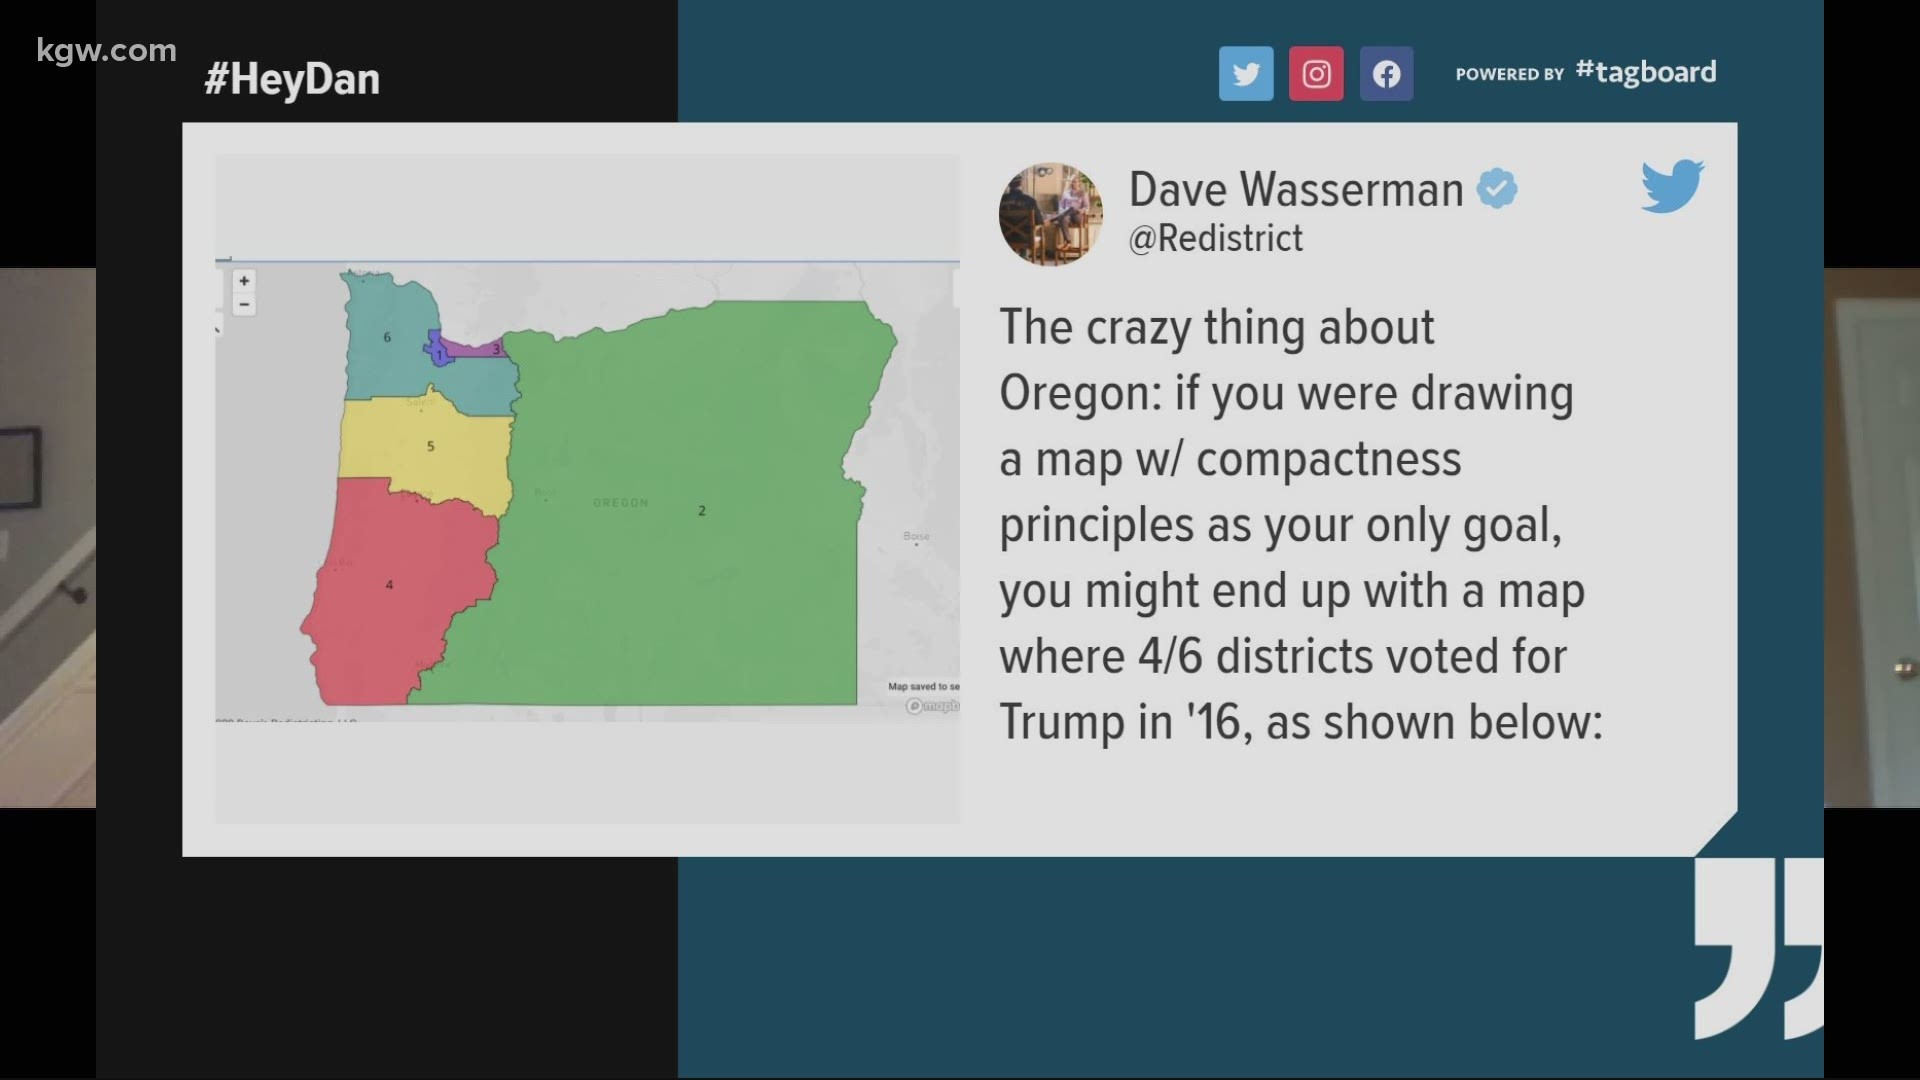 Oregon is expected to get a new seat in Congress for the first time since 1982. Here's what would be in play in that situation.